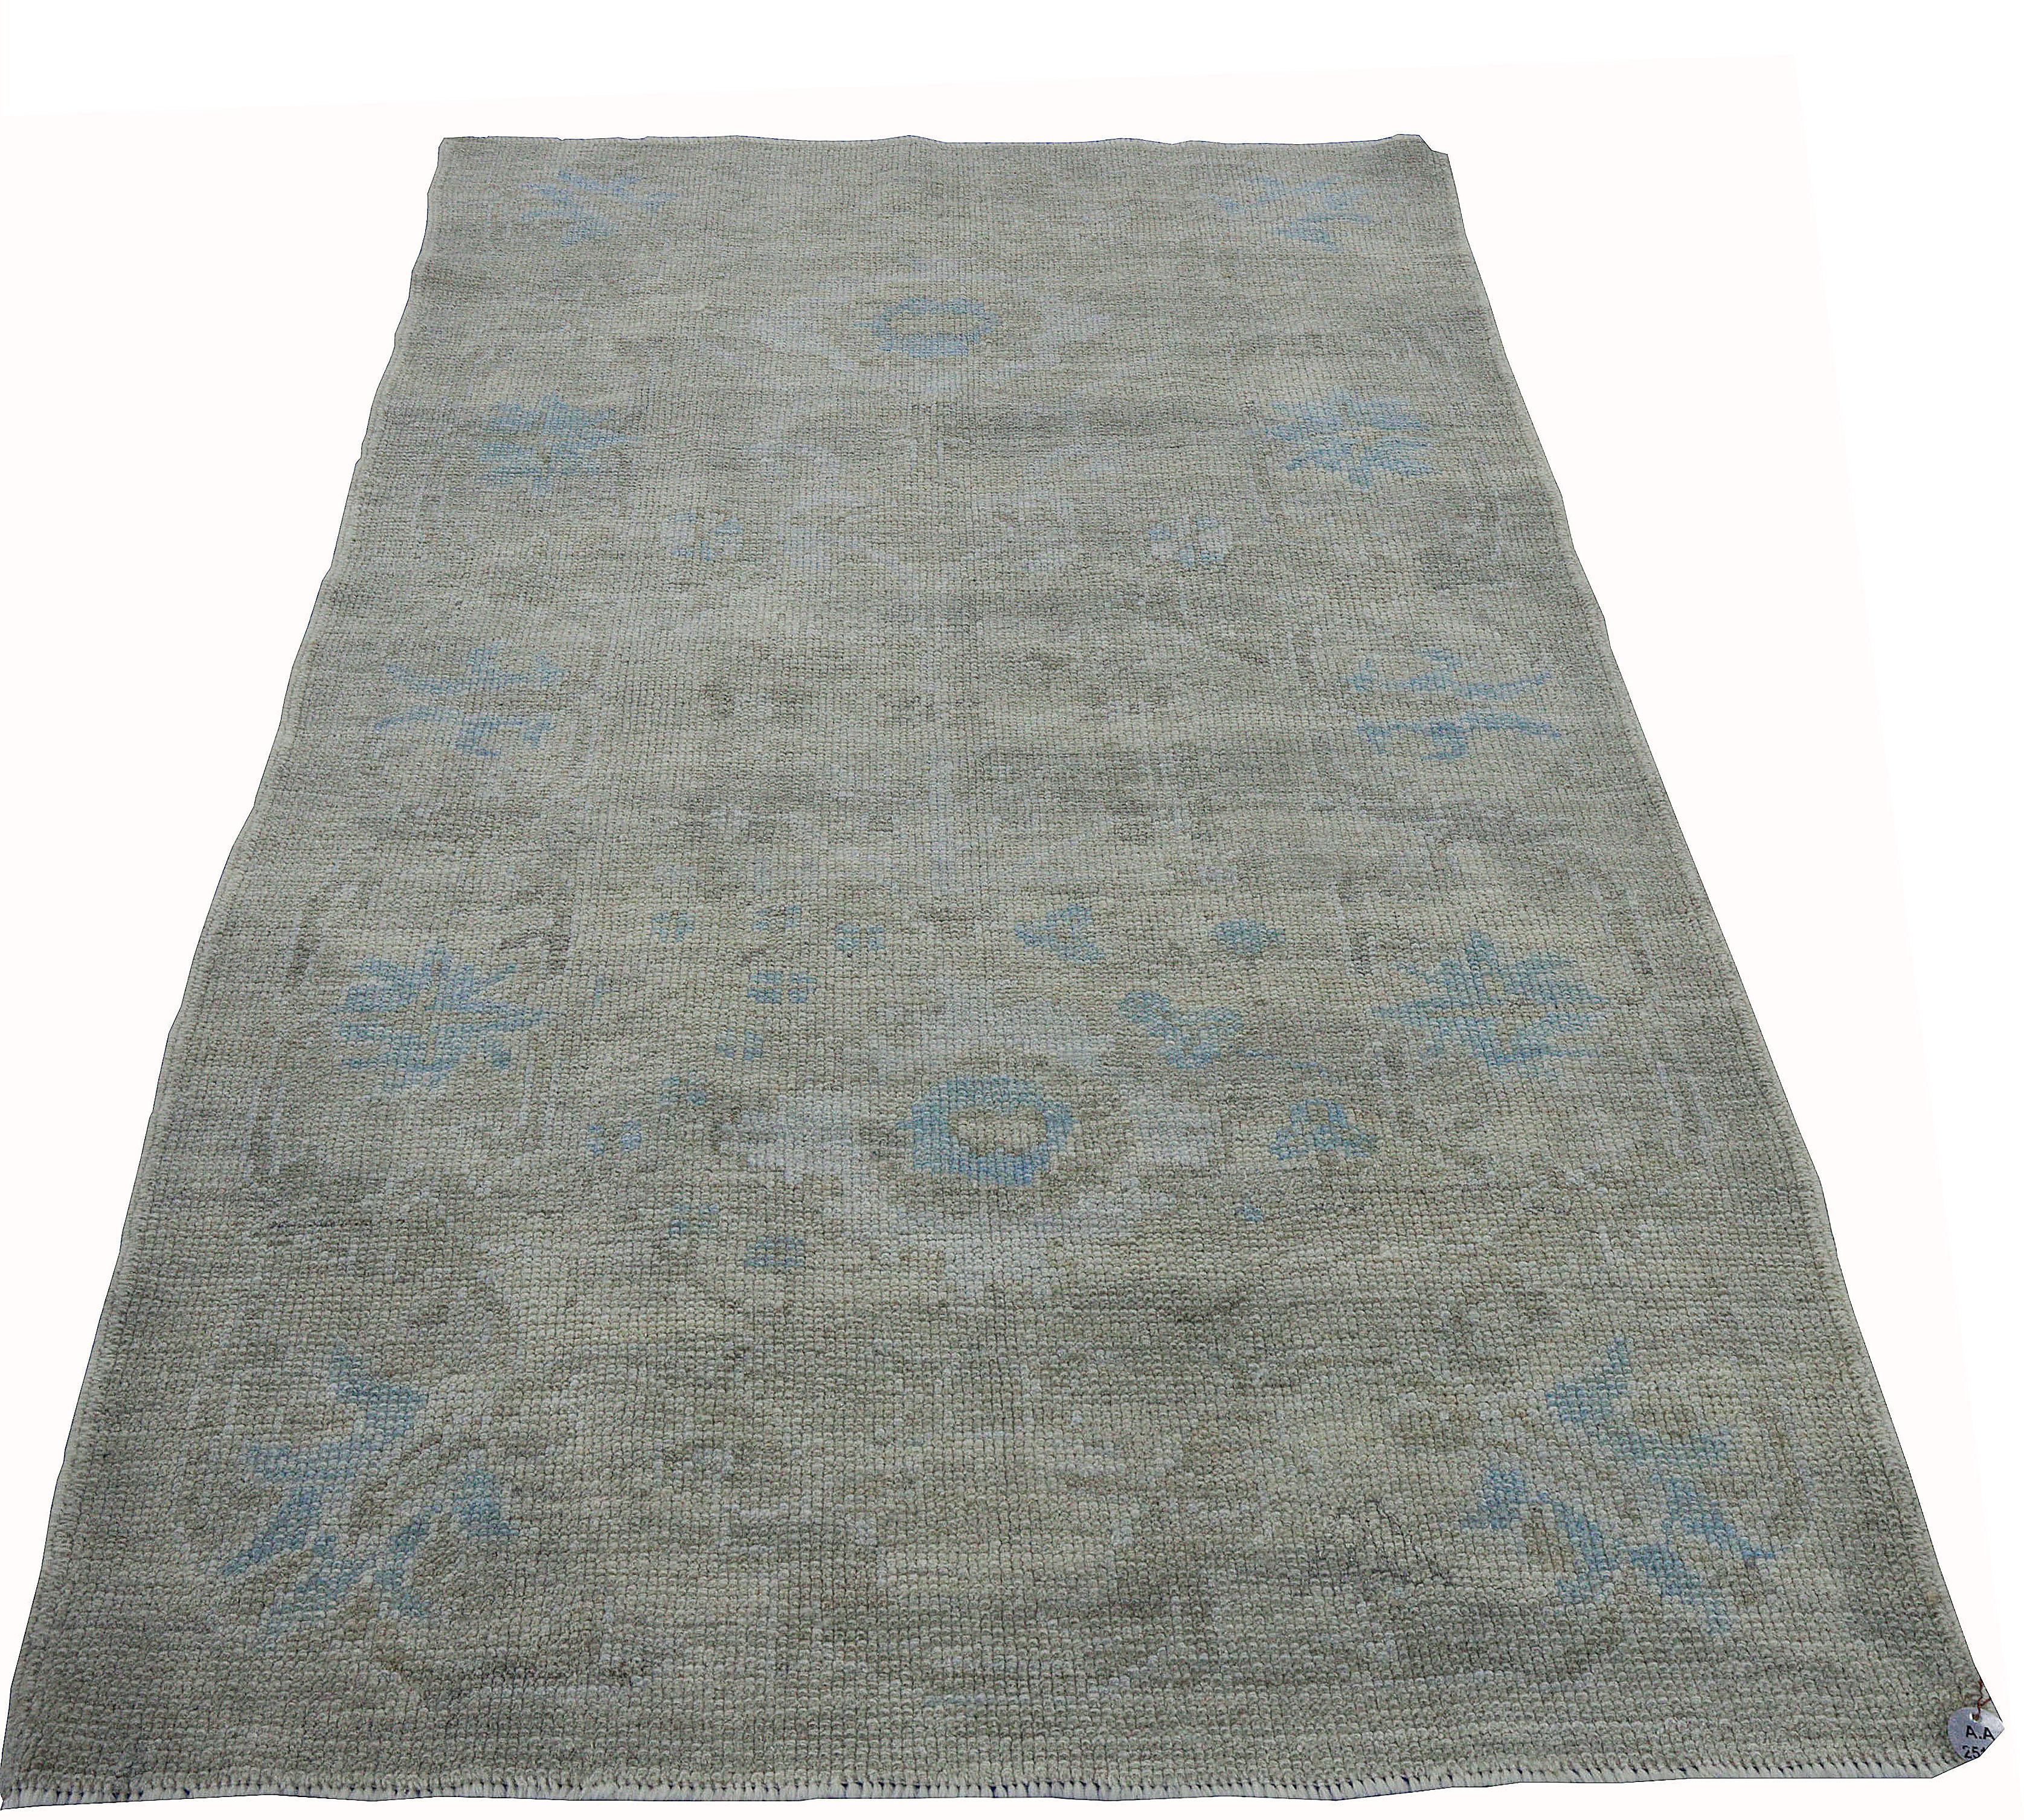 Contemporary Turkish rug made of handwoven sheep’s wool of the finest quality. It’s colored with organic vegetable dyes that are certified safe for humans and pets alike. It features a gorgeous beige field with floral details in blue and gray